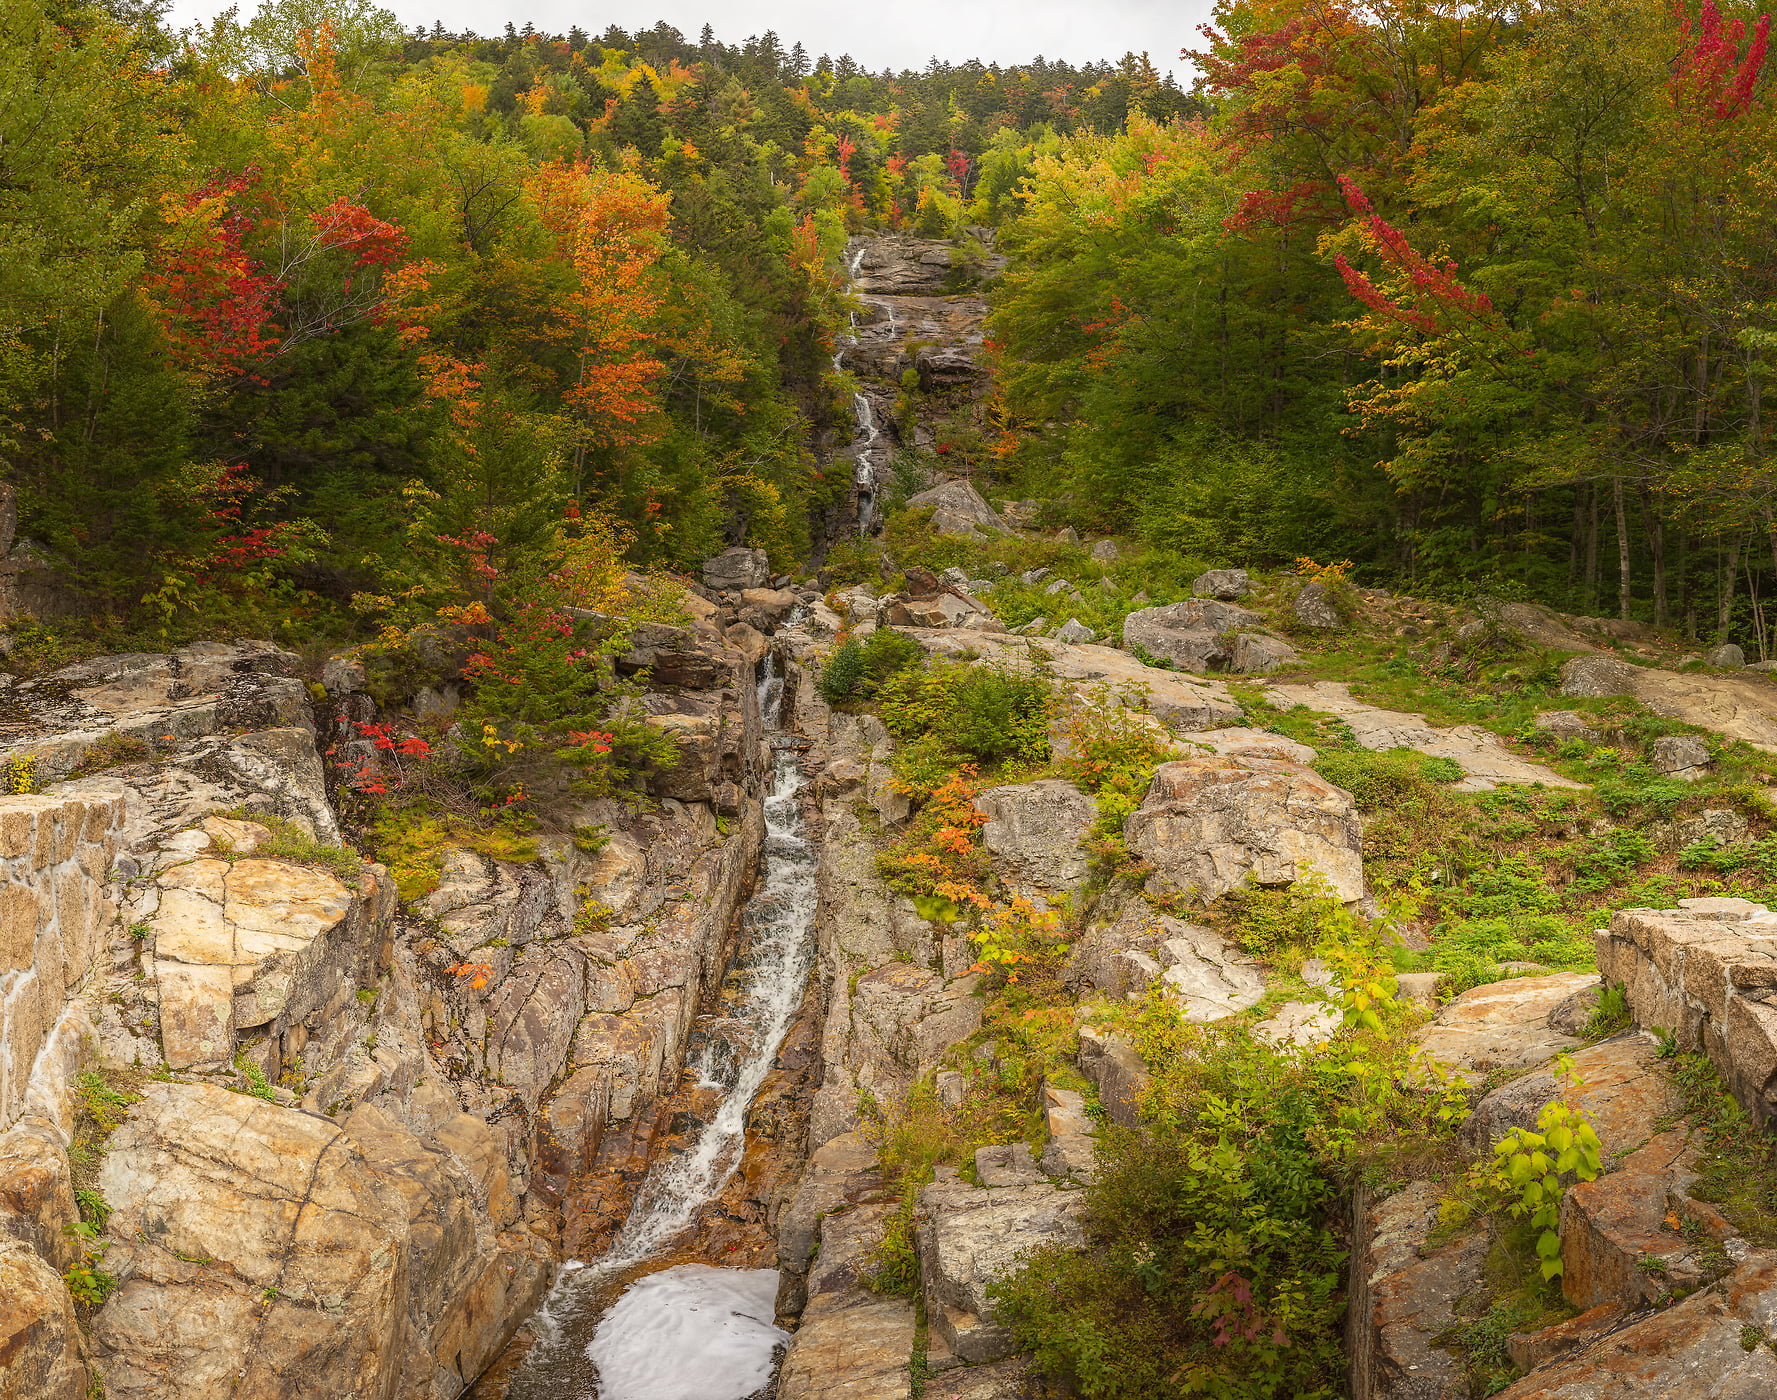 2,846 megapixels! A very high resolution, large-format VAST photo print of a waterfall in autumn; nature photograph created by John Freeman in White Mountains, New Hampshire